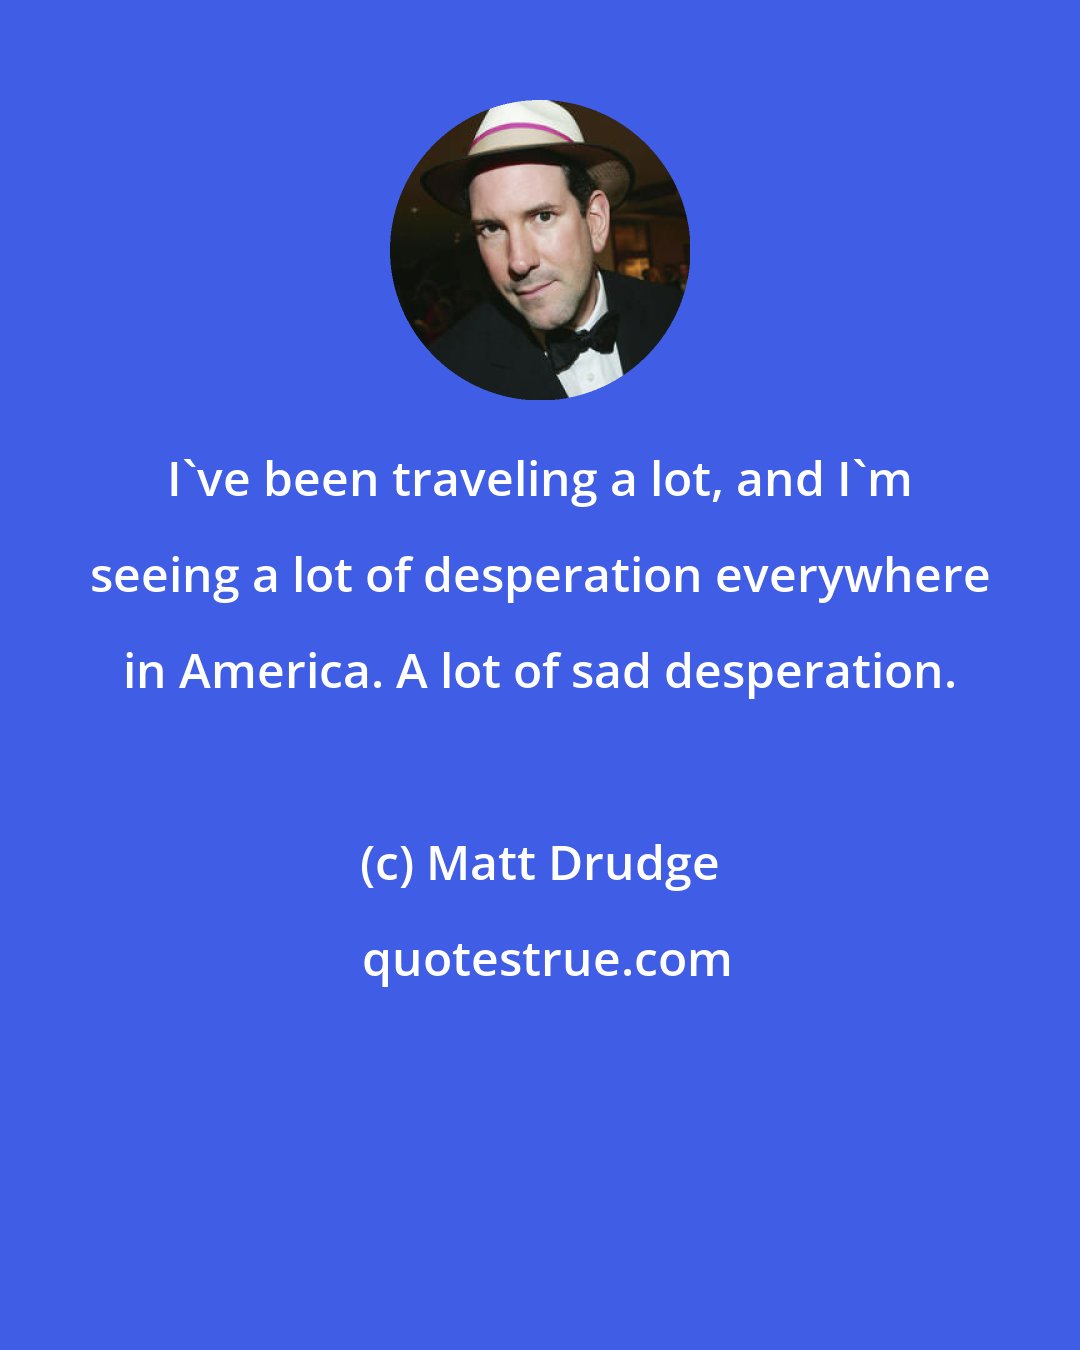 Matt Drudge: I've been traveling a lot, and I'm seeing a lot of desperation everywhere in America. A lot of sad desperation.